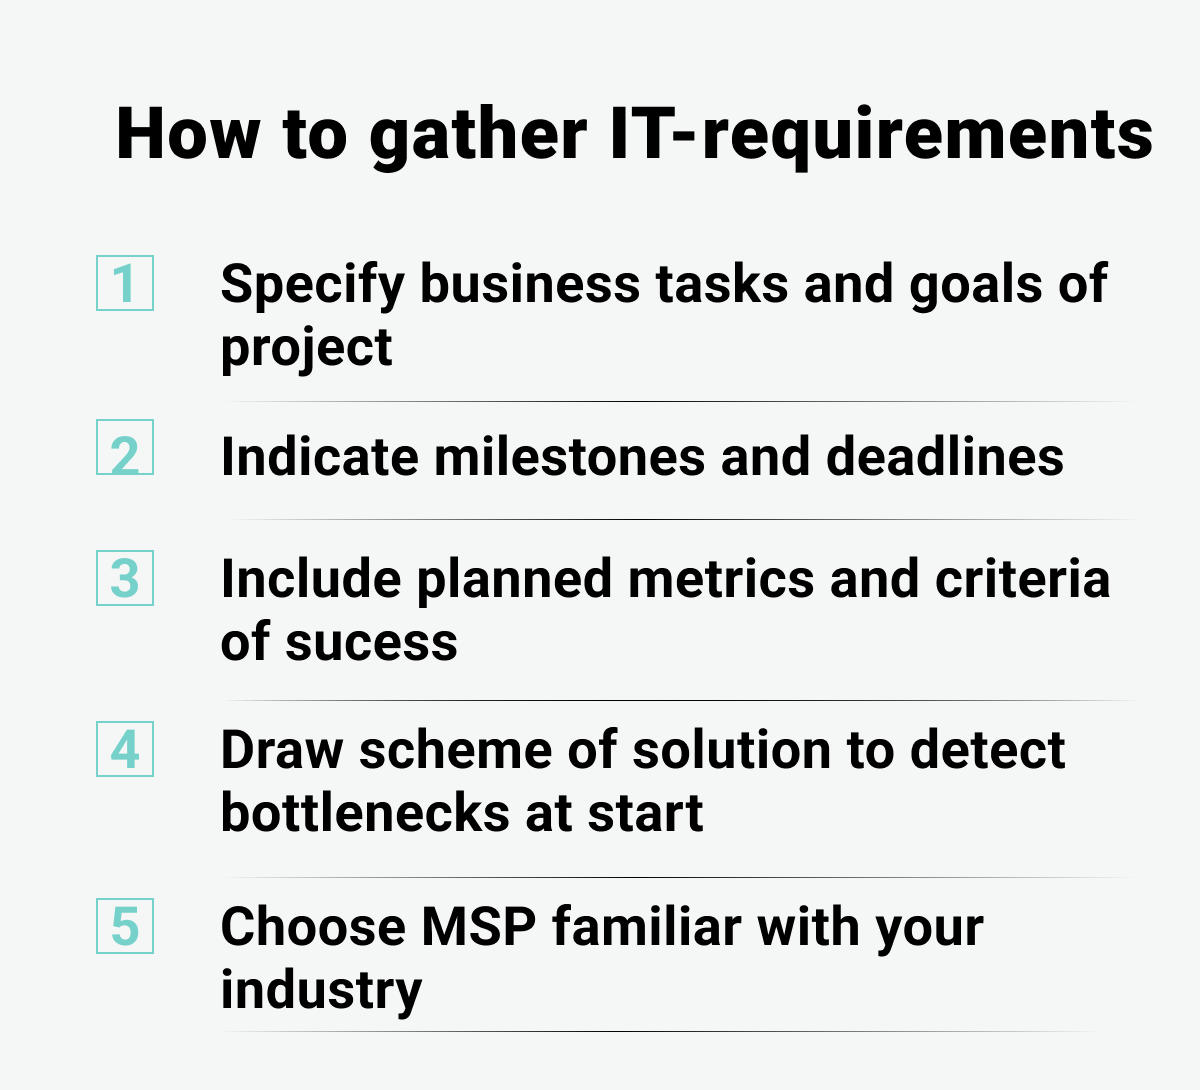 Chechlist How to gather IT-requirement 